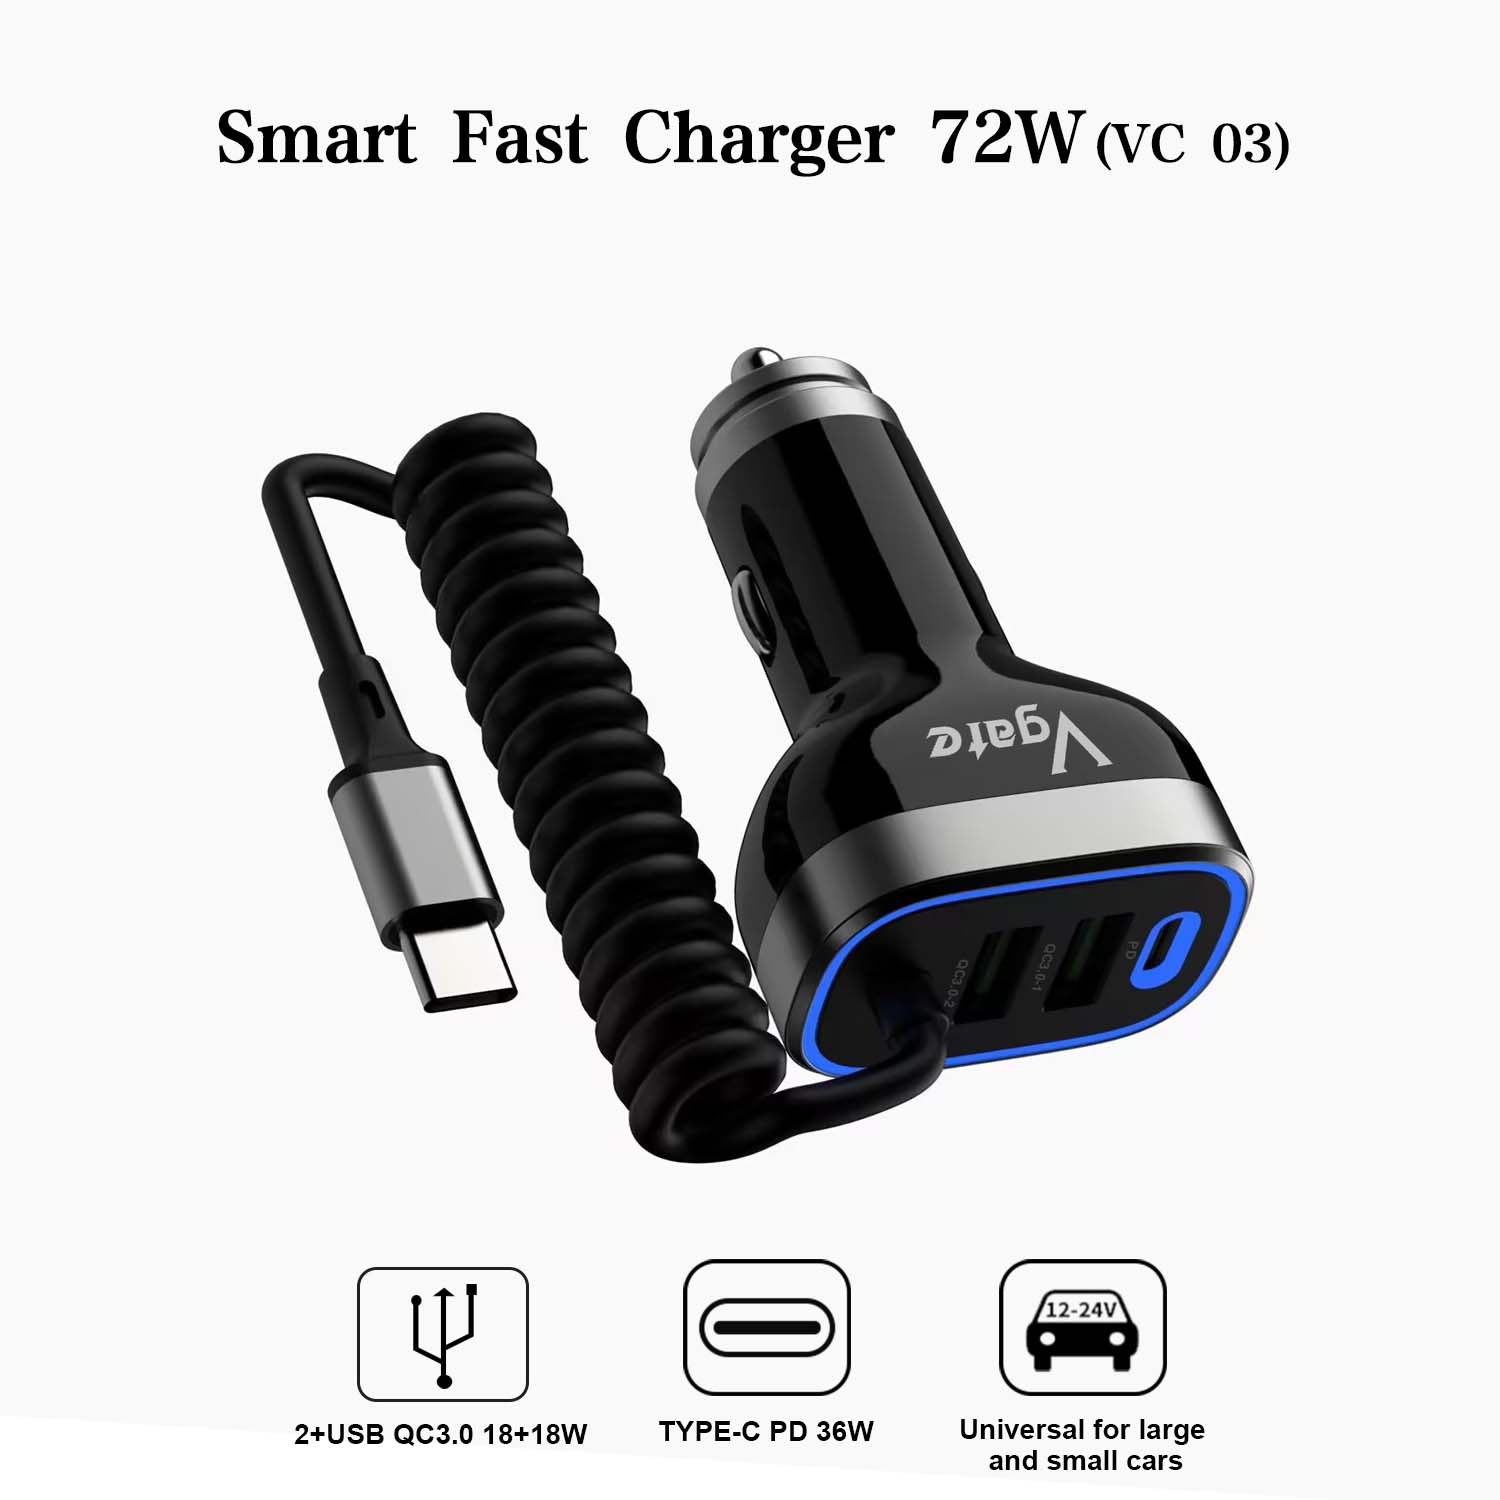 Smart Fast Charger 72W(VC 03)